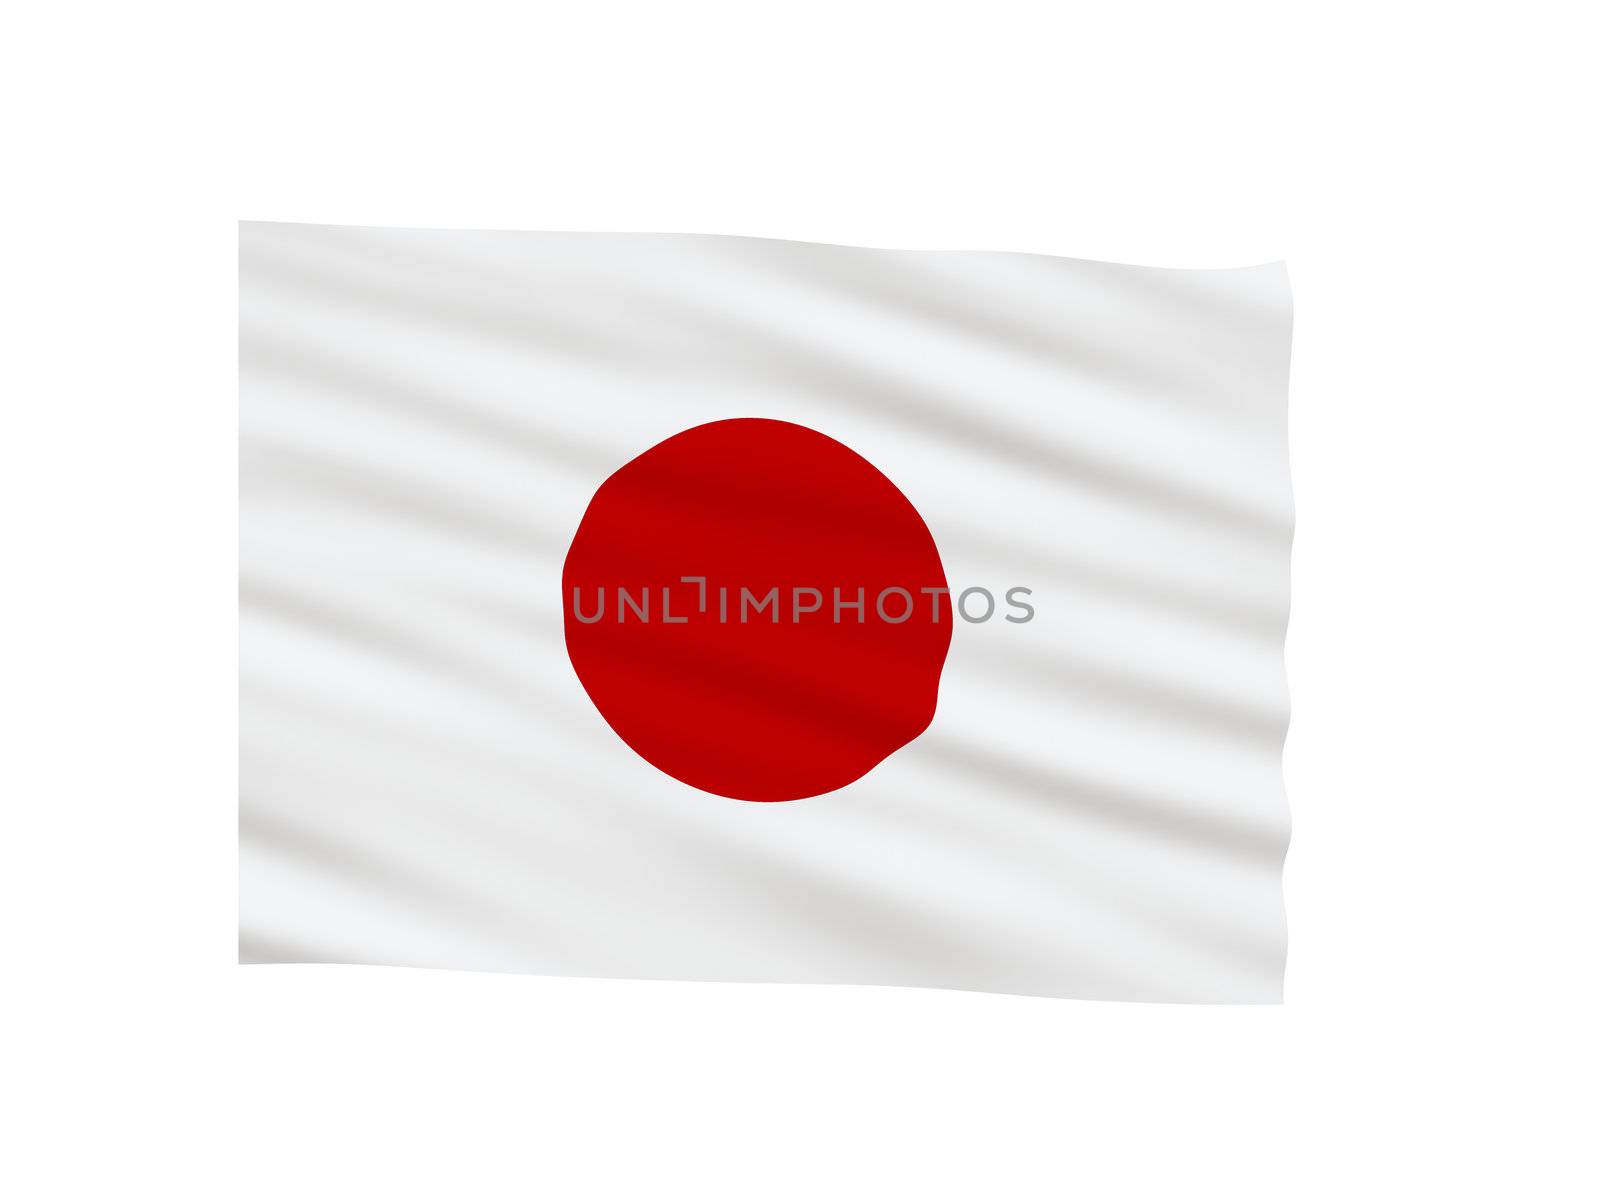 A nice image of the Japan flag